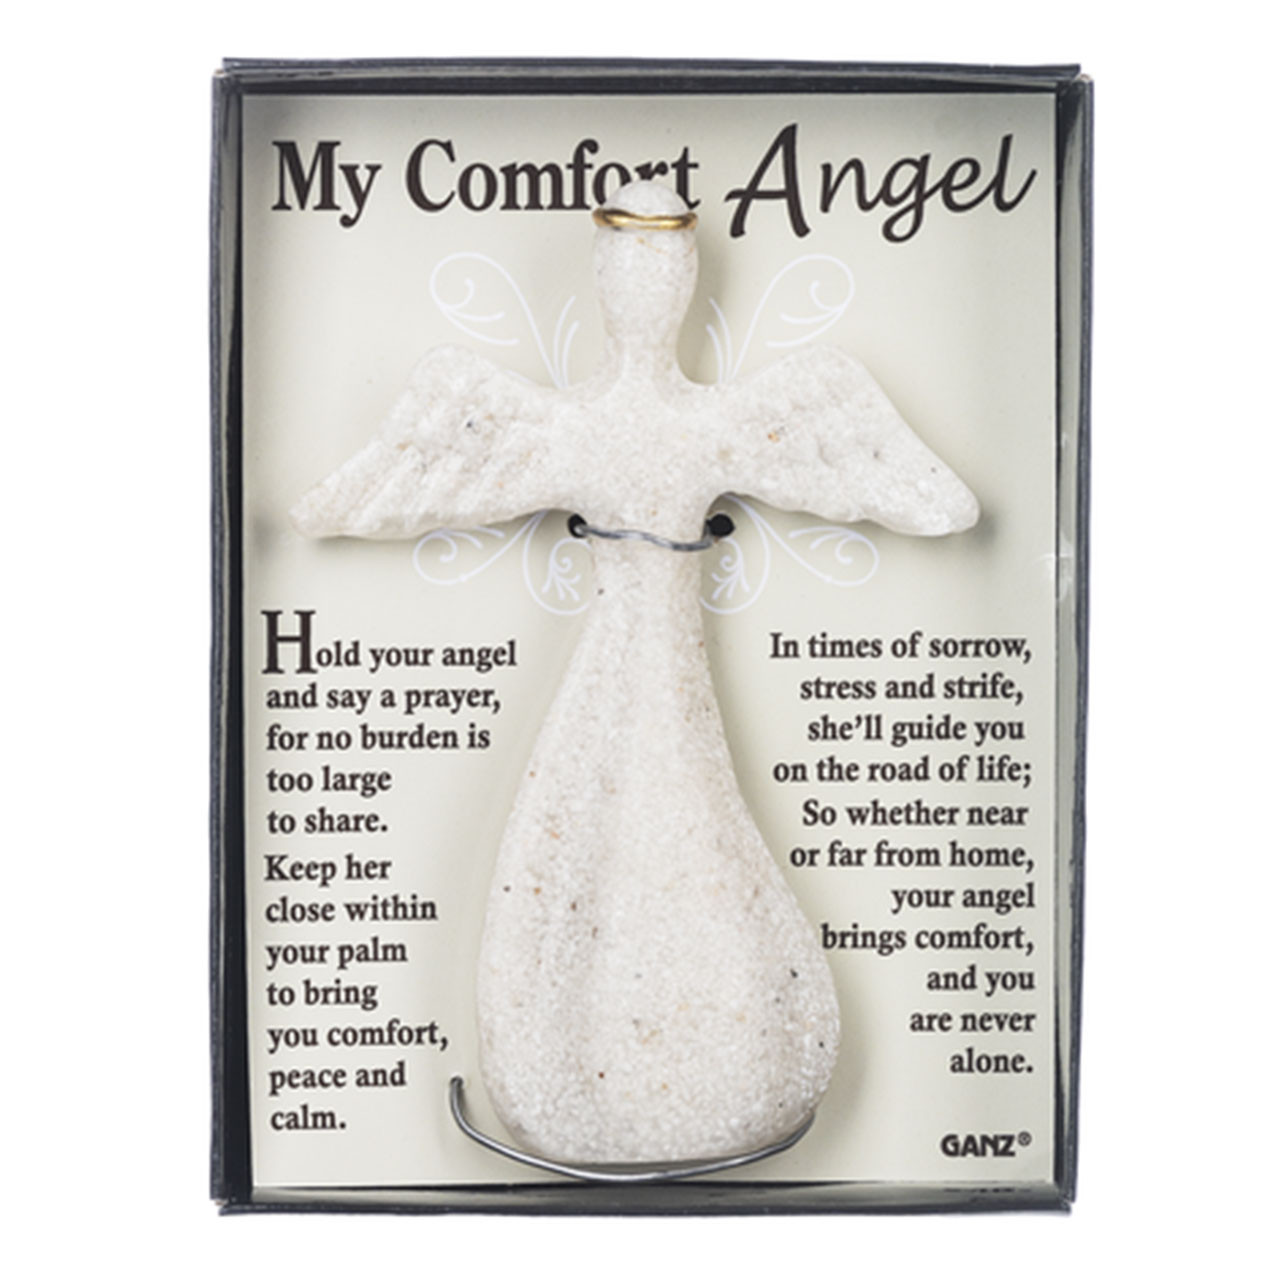 My Comfort Angel to hold in your hand